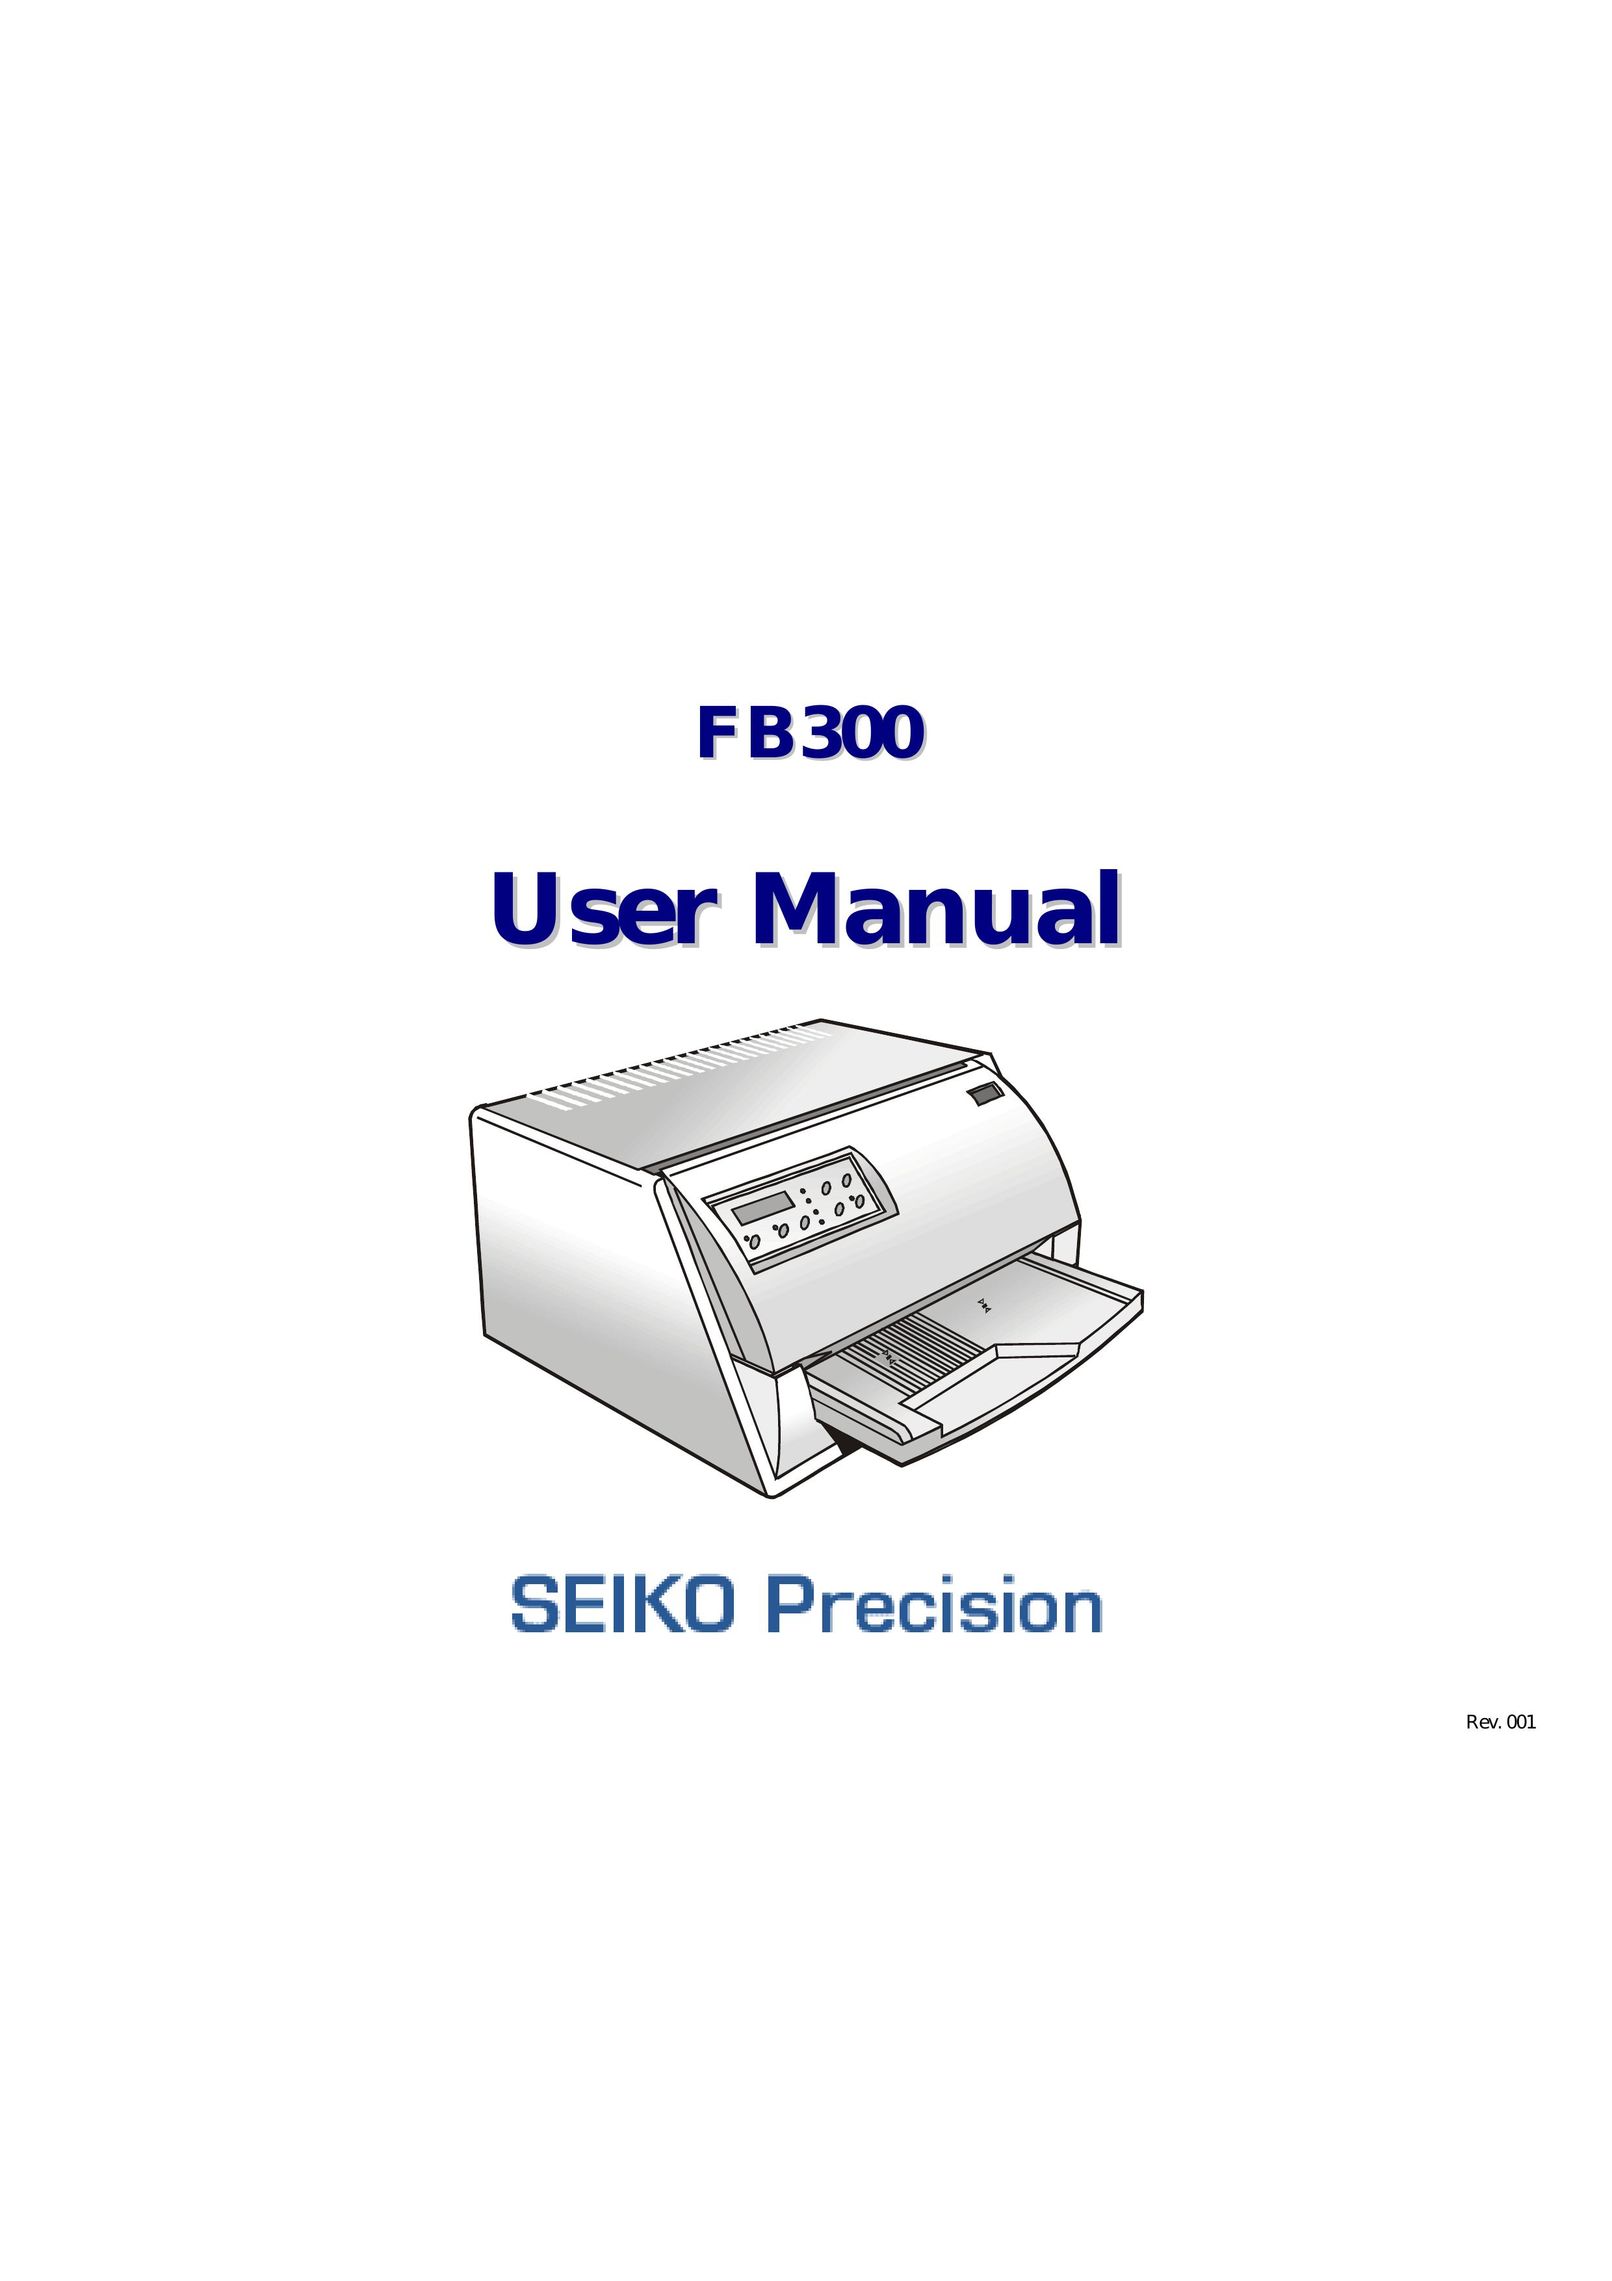 Seiko Group FB300 All in One Printer User Manual